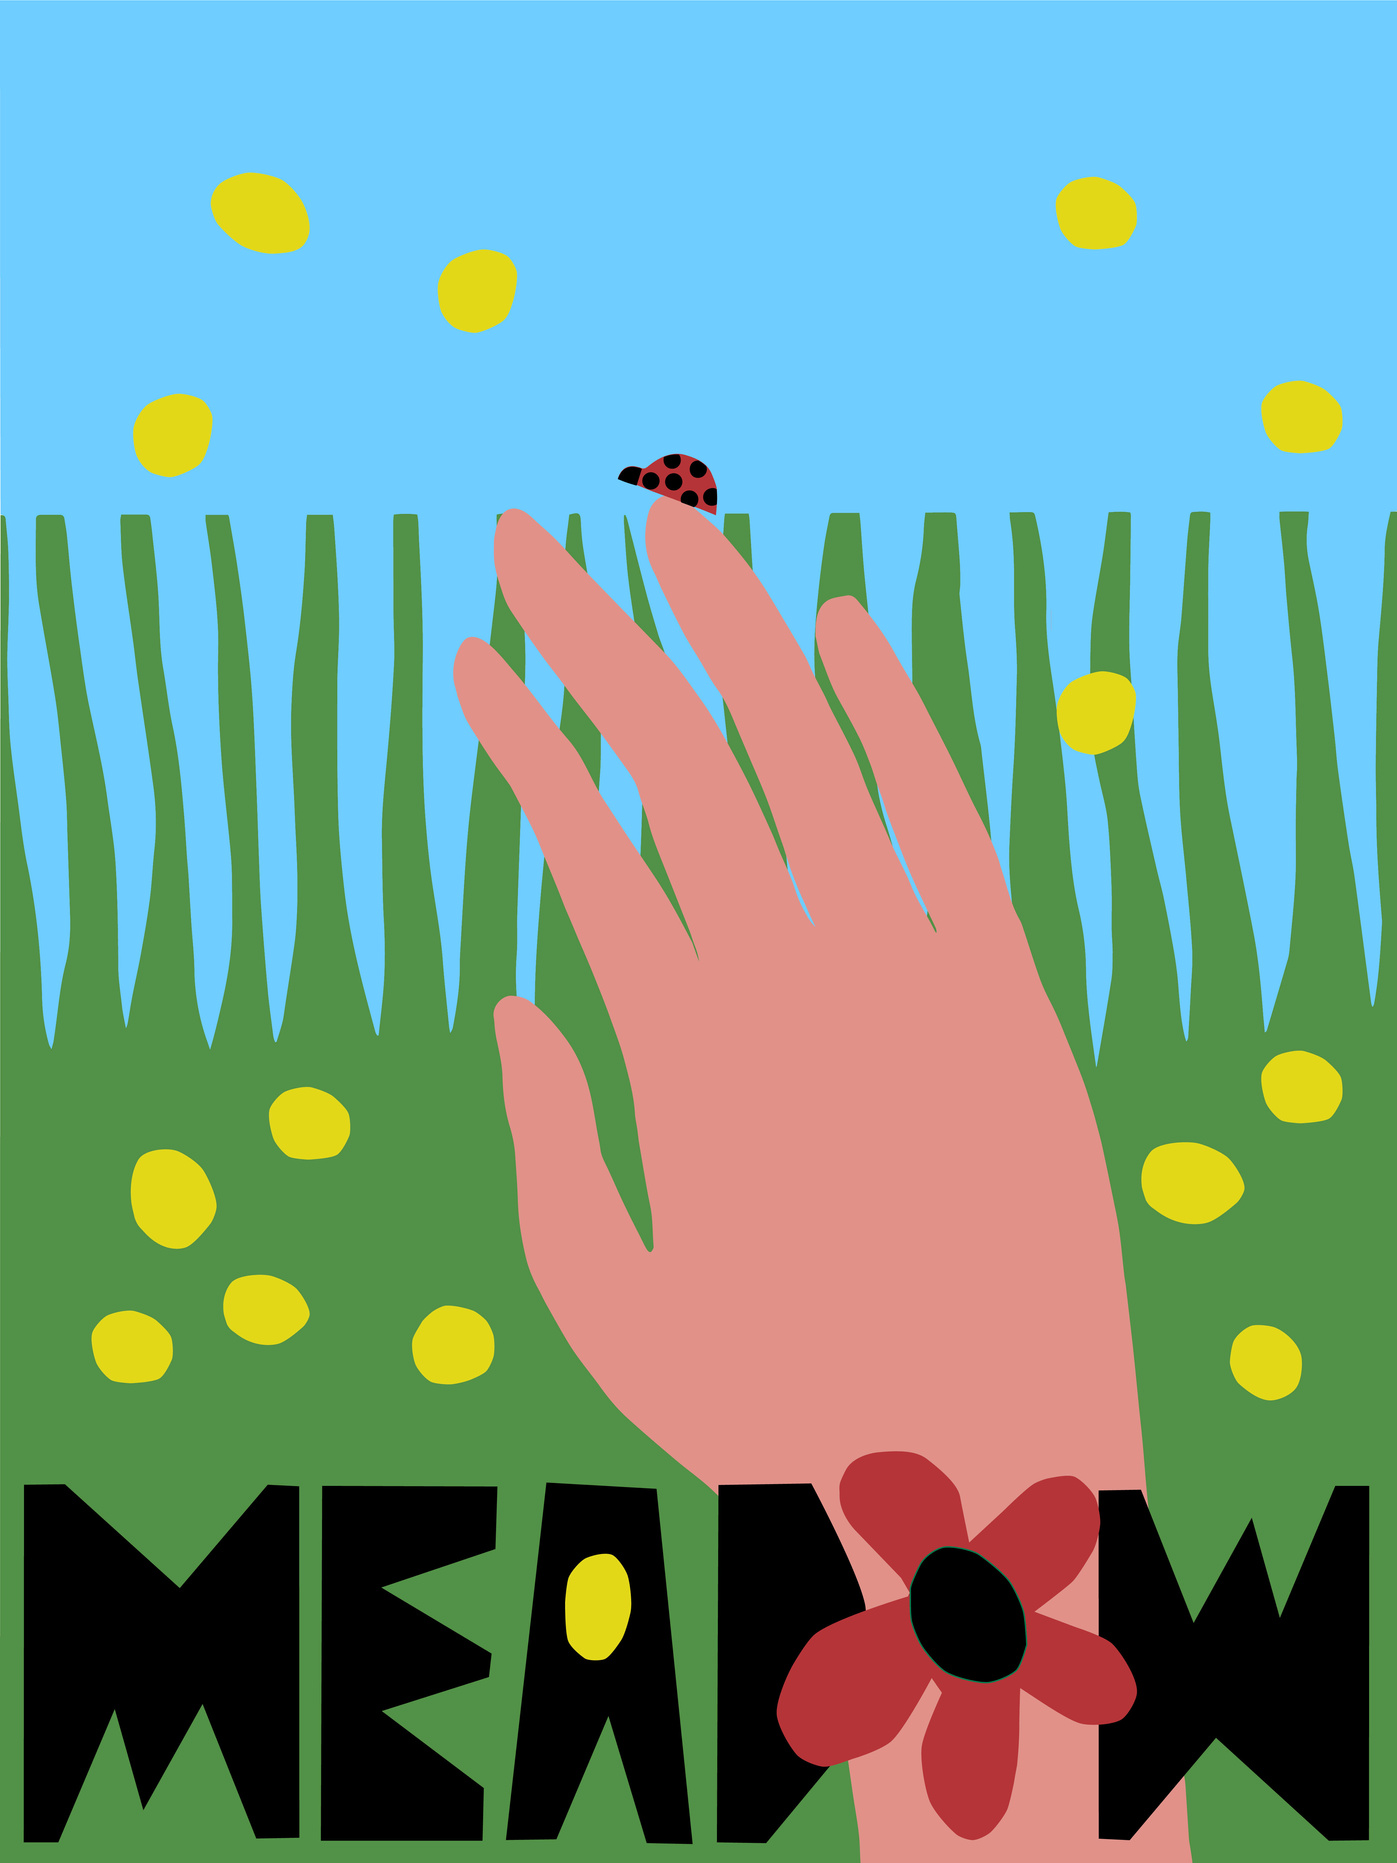 a digital poster showing a hand holding a ladybird against a blue sky. there is a green meadow and yellow flowers. at the bottom the black letters saying 'meadow' with a red flower instead of the letter 'o'